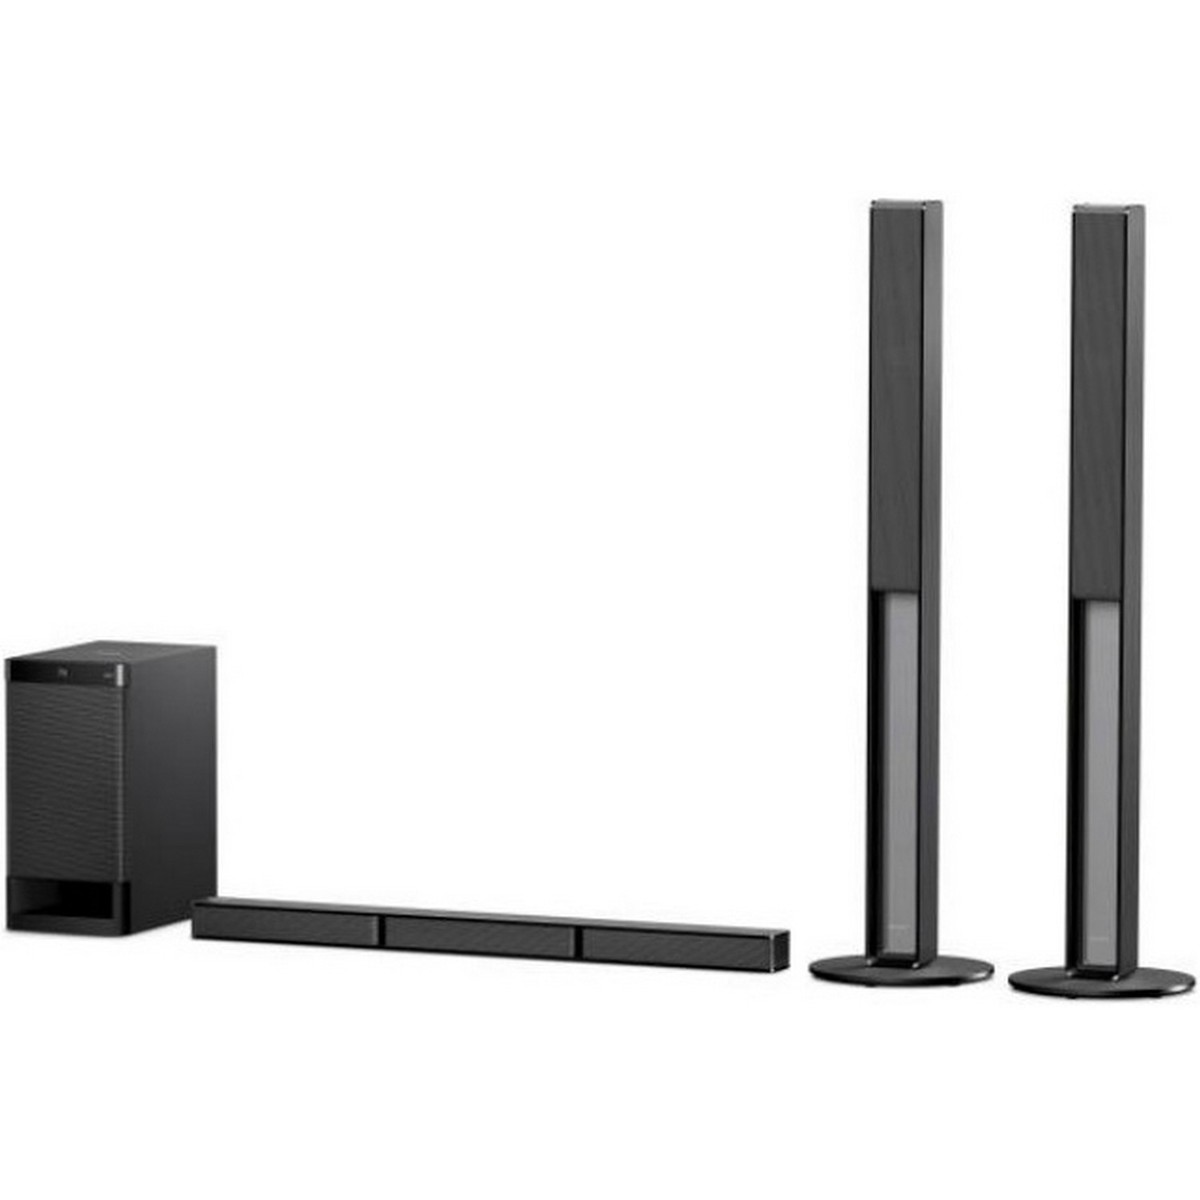 sony 5.1 tallboy home theatre system